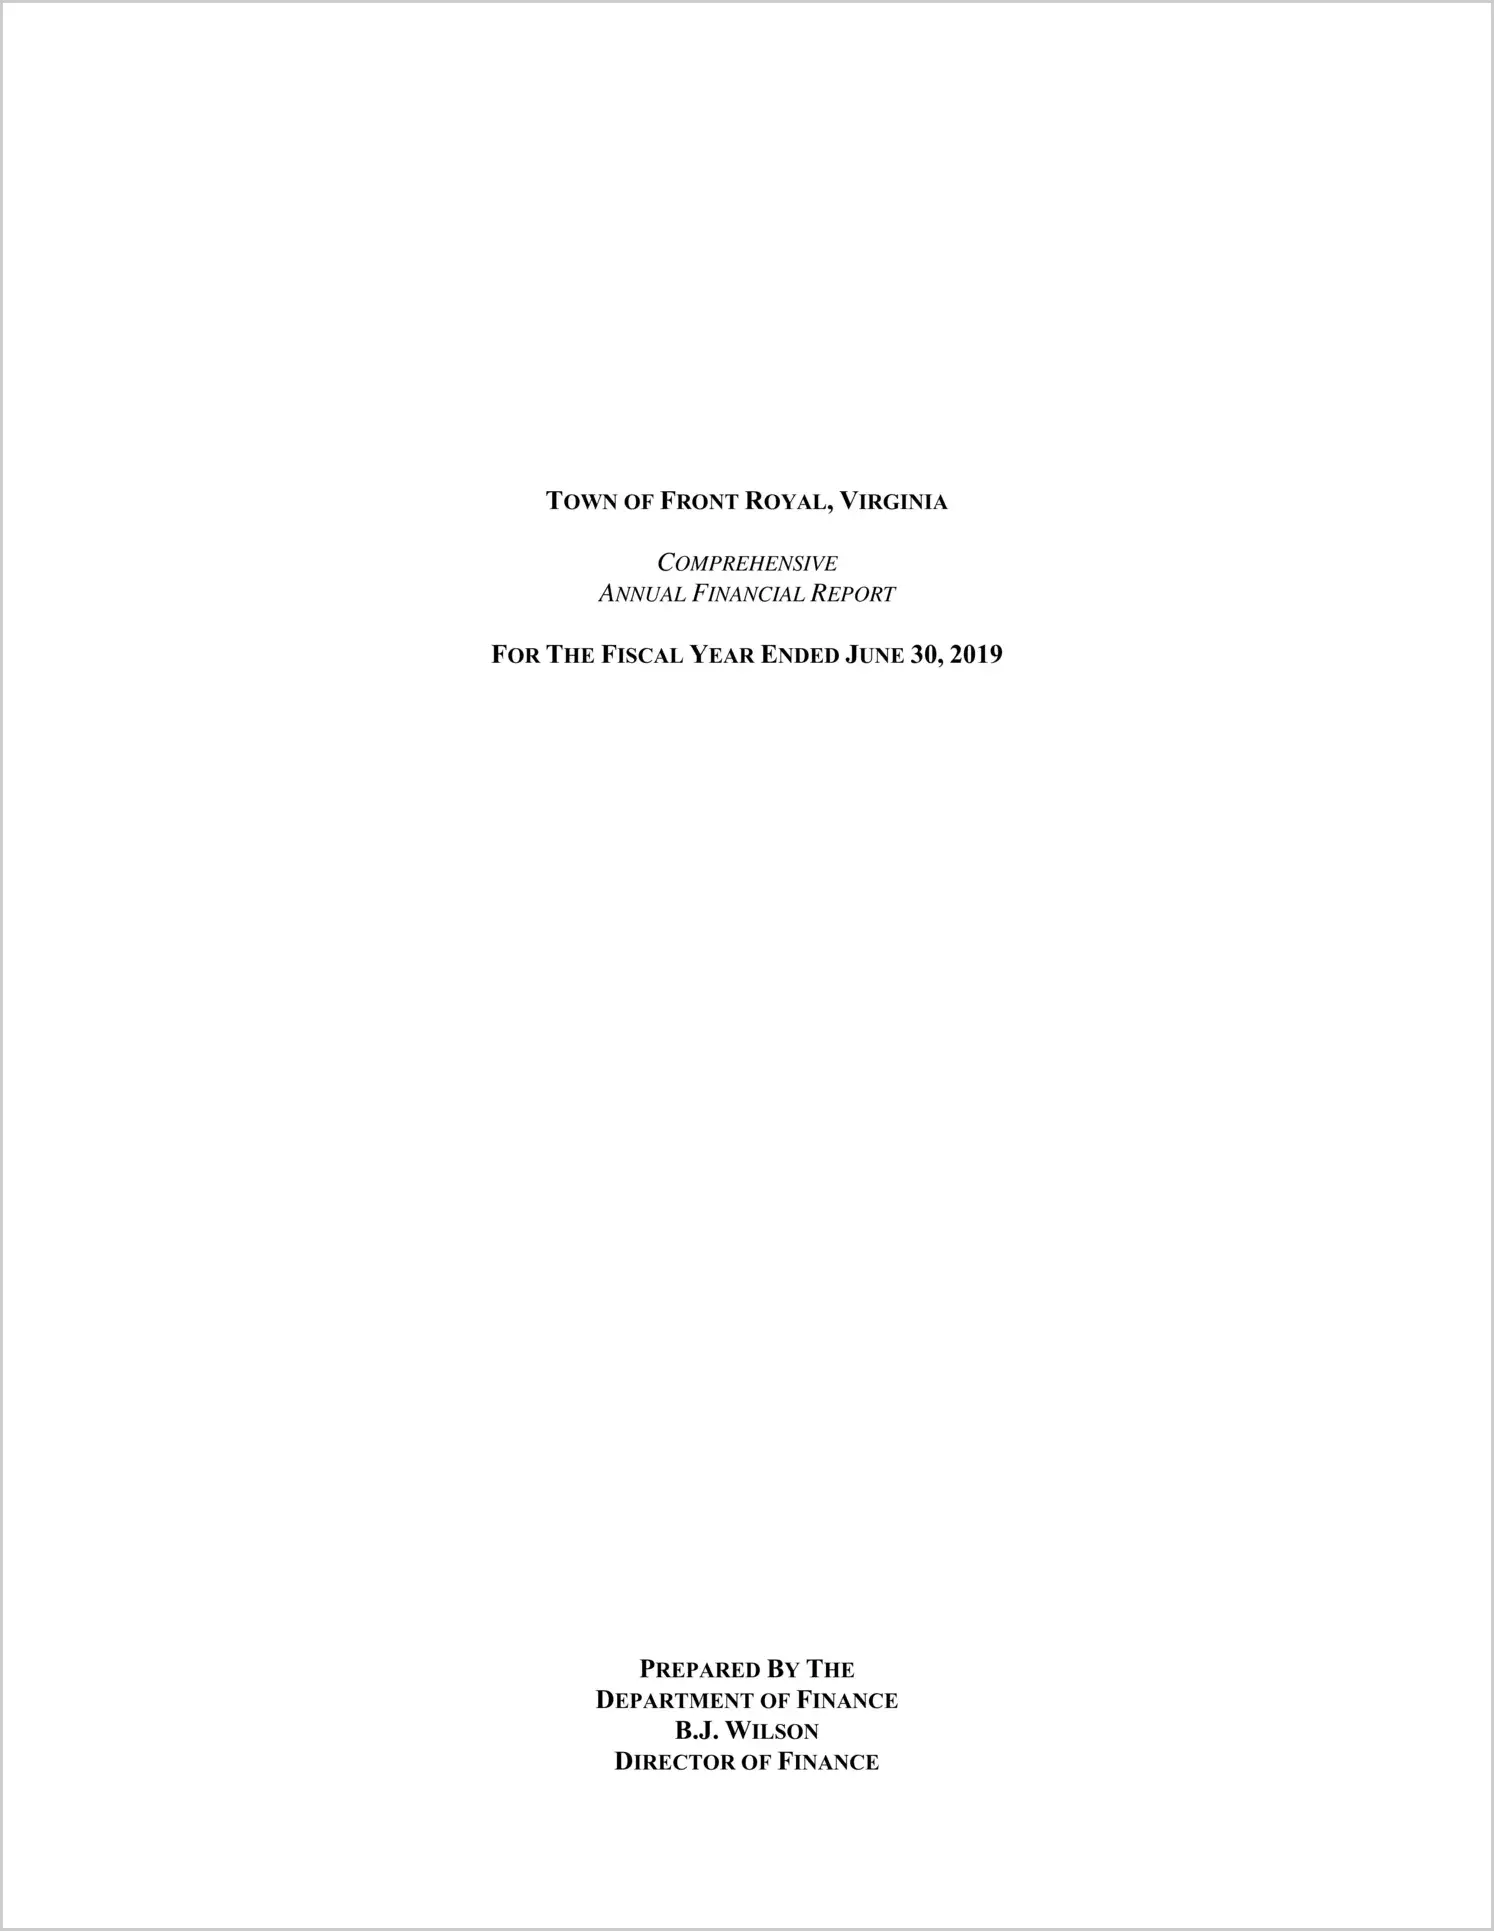 2019 Annual Financial Report for Town of Front Royal